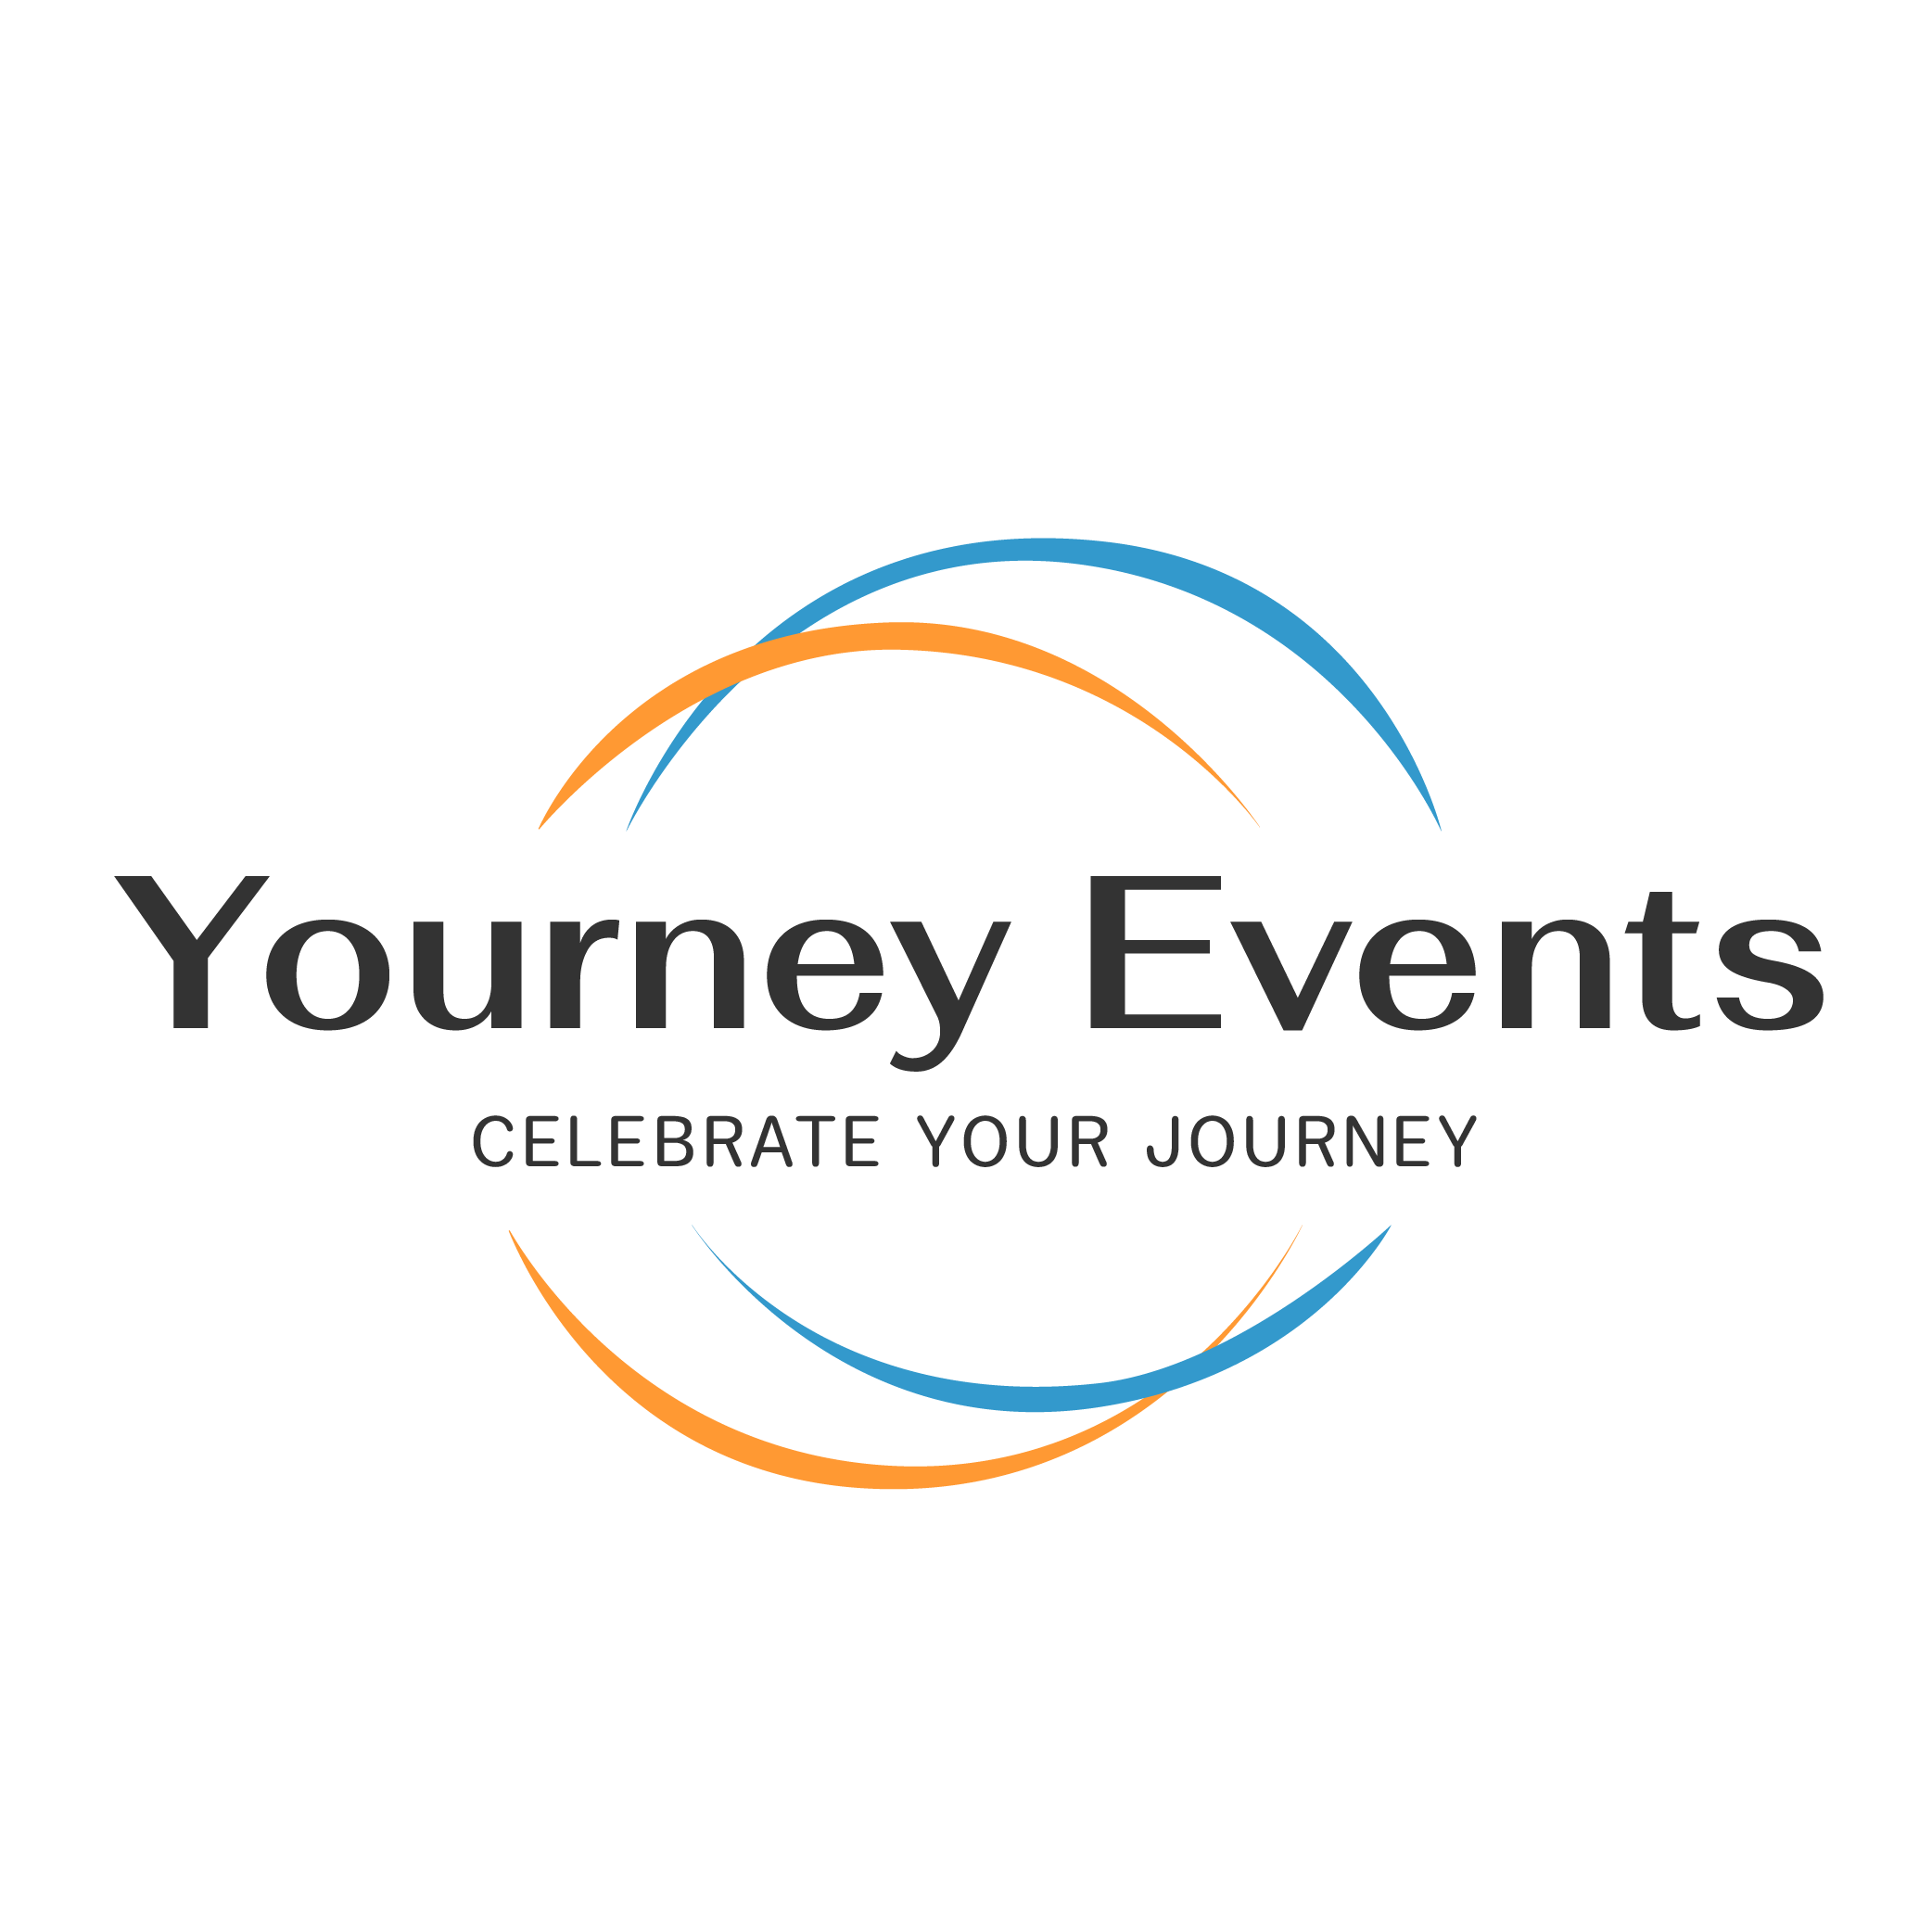 Yourney Events